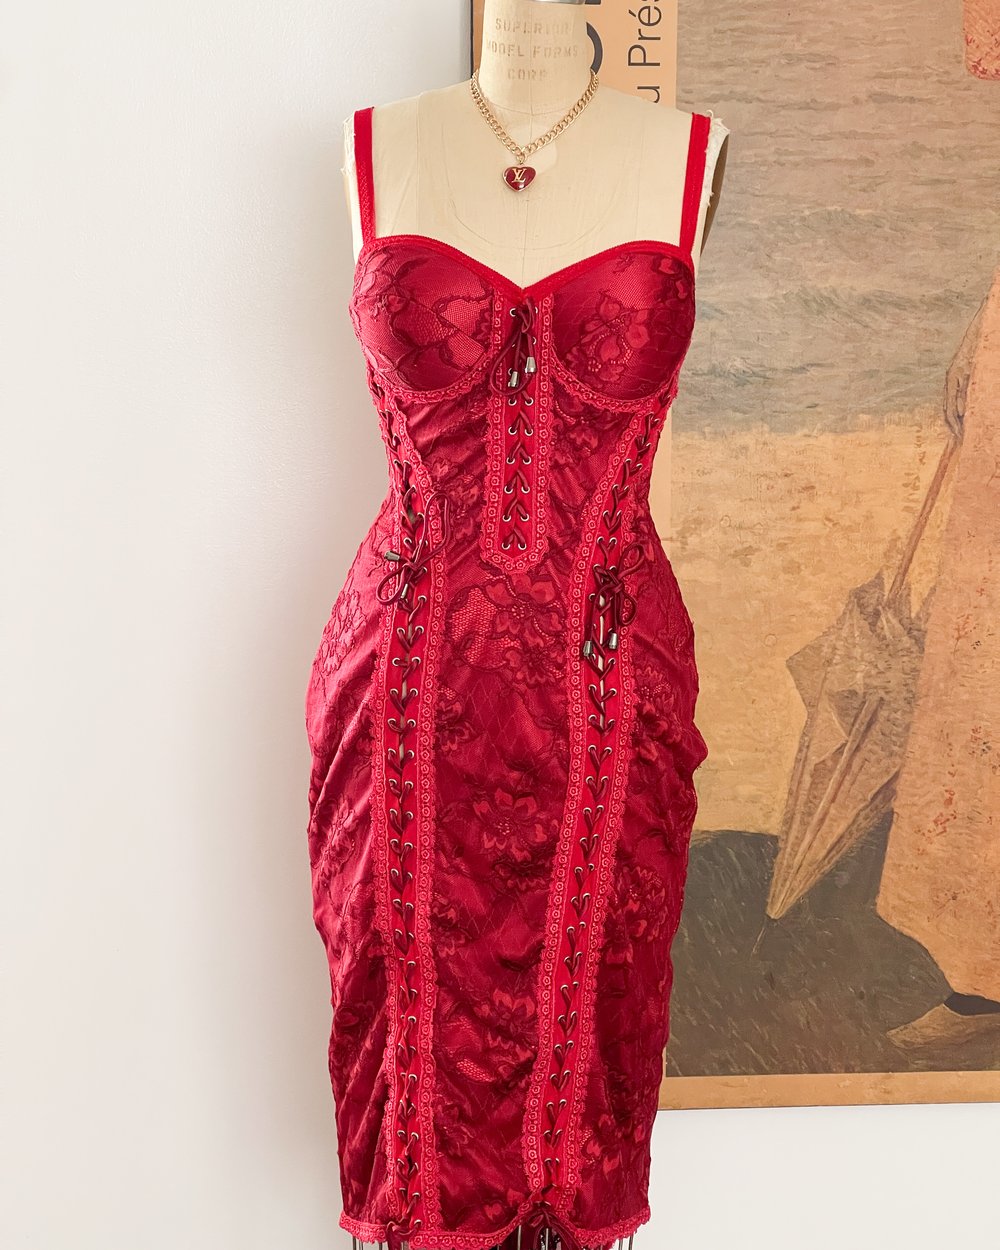 RARE Luxurious English Designer Red Lace-Up Bustier Corset Dress